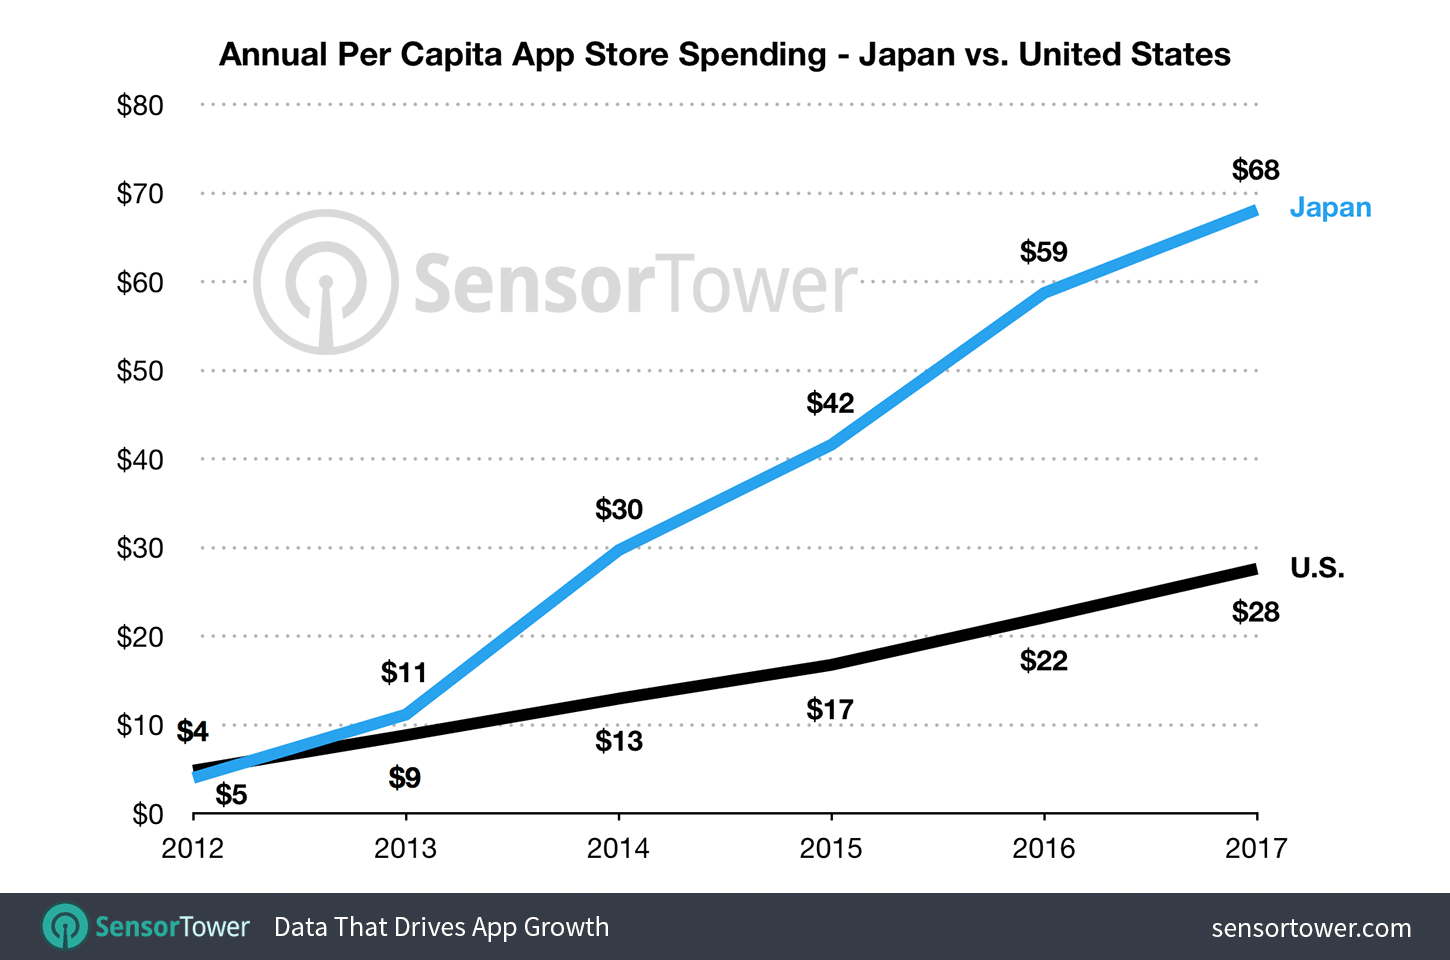 Chart showing annual per capita spending on Apple's App Store by Japan and the United States between 2012 and 2017